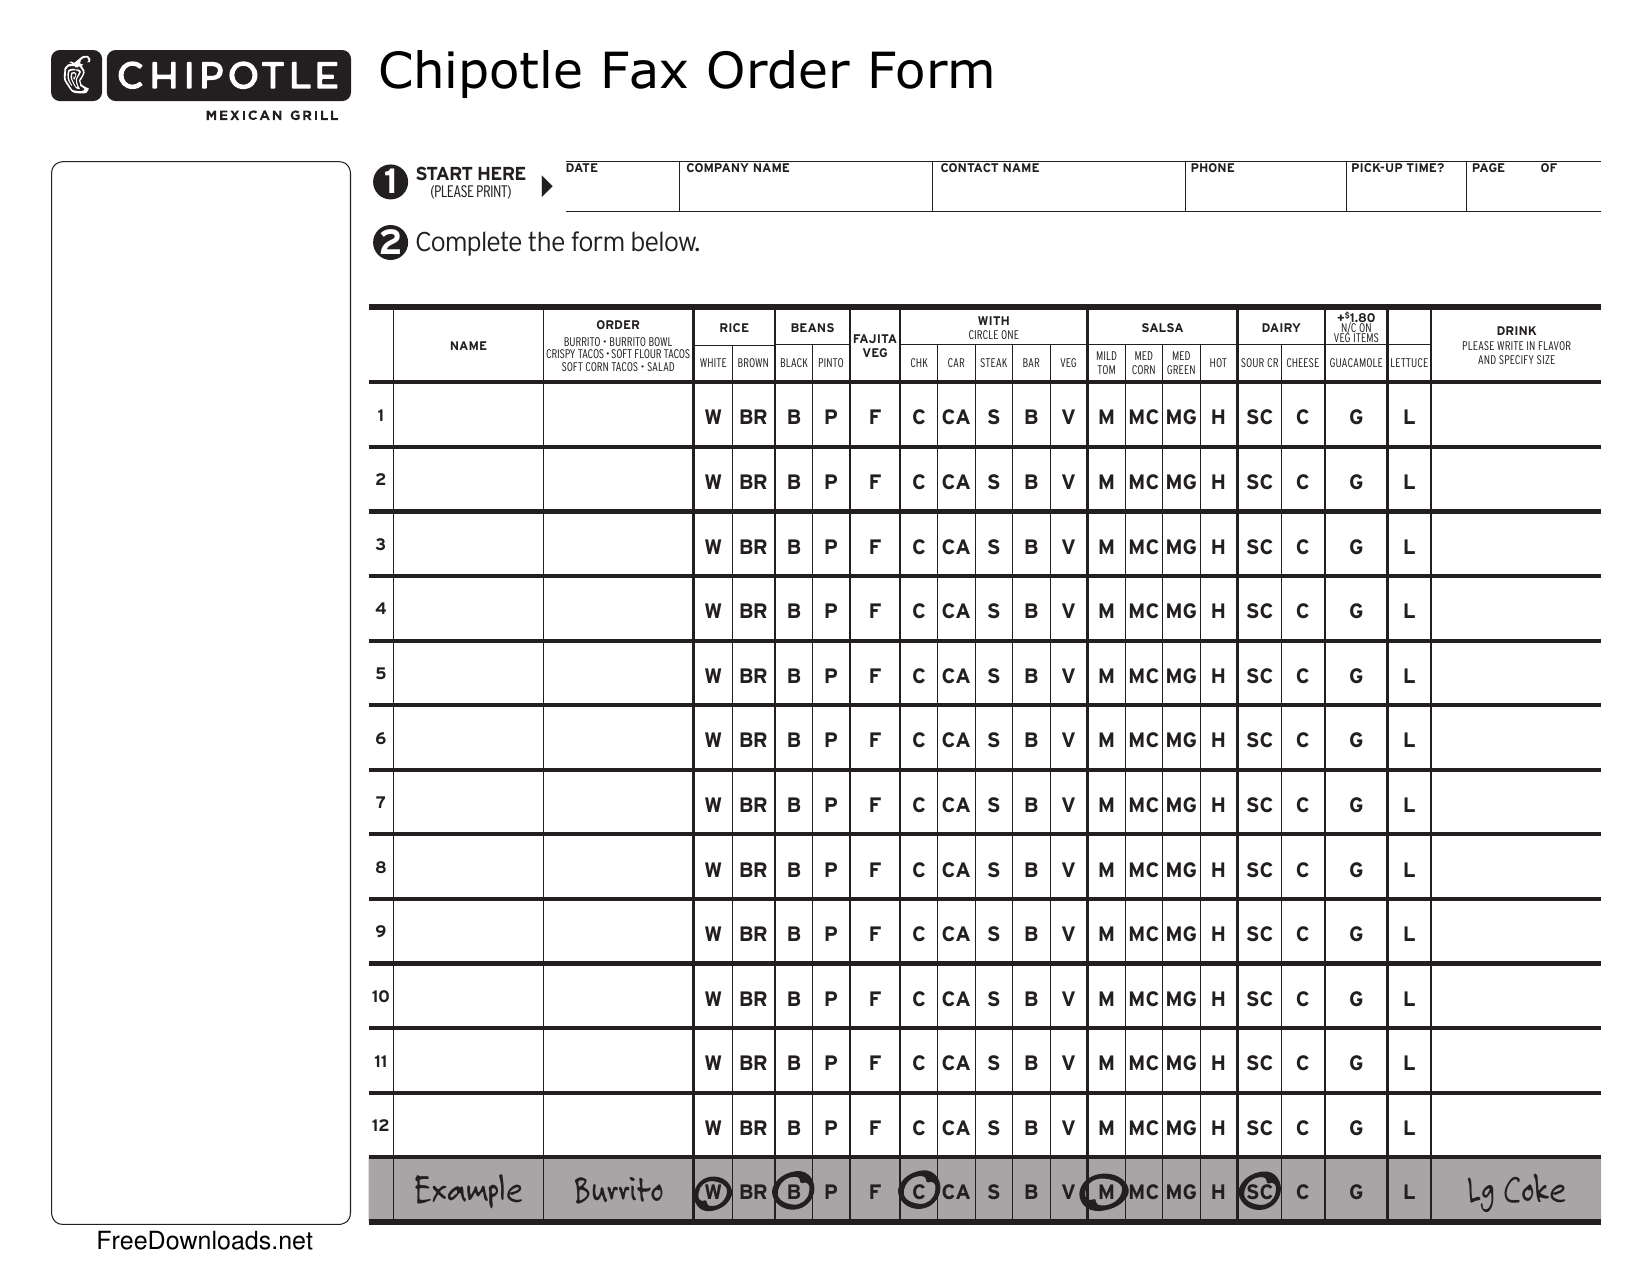 Chipotle Order Form Printable 11 Brilliant Ways To 